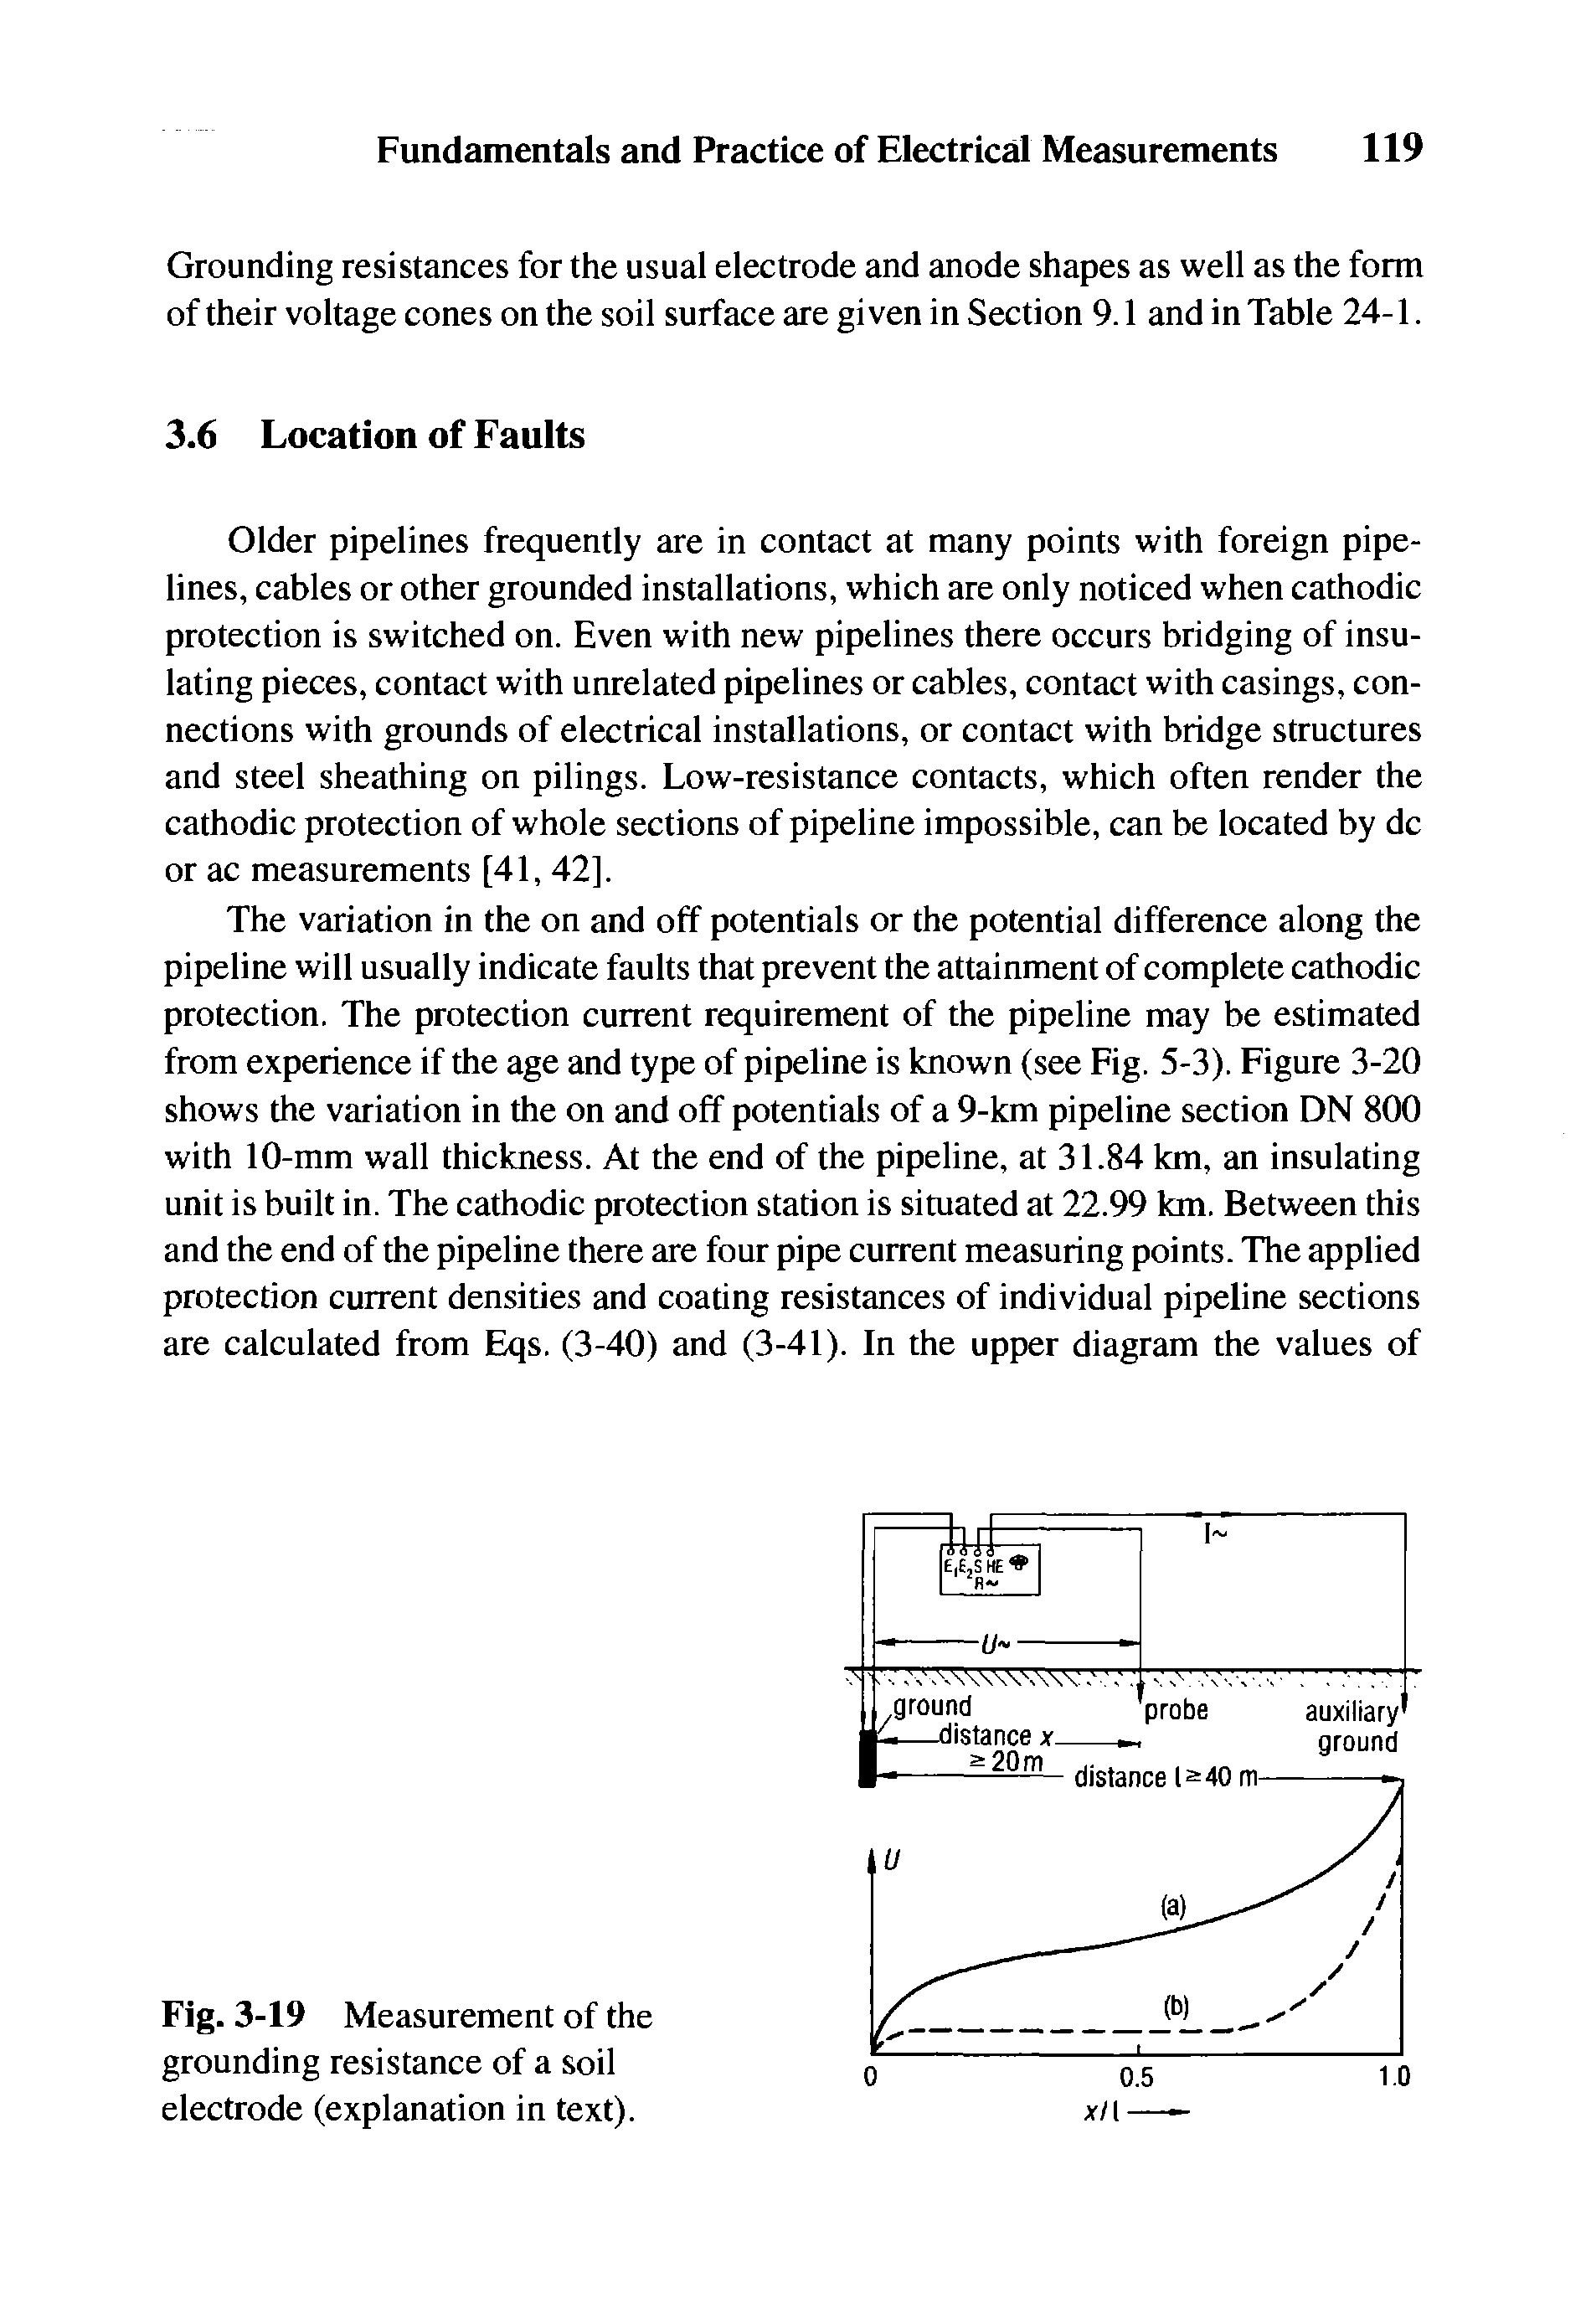 Fig. 3-19 Measurement of the grounding resistance of a soil electrode (explanation in text).